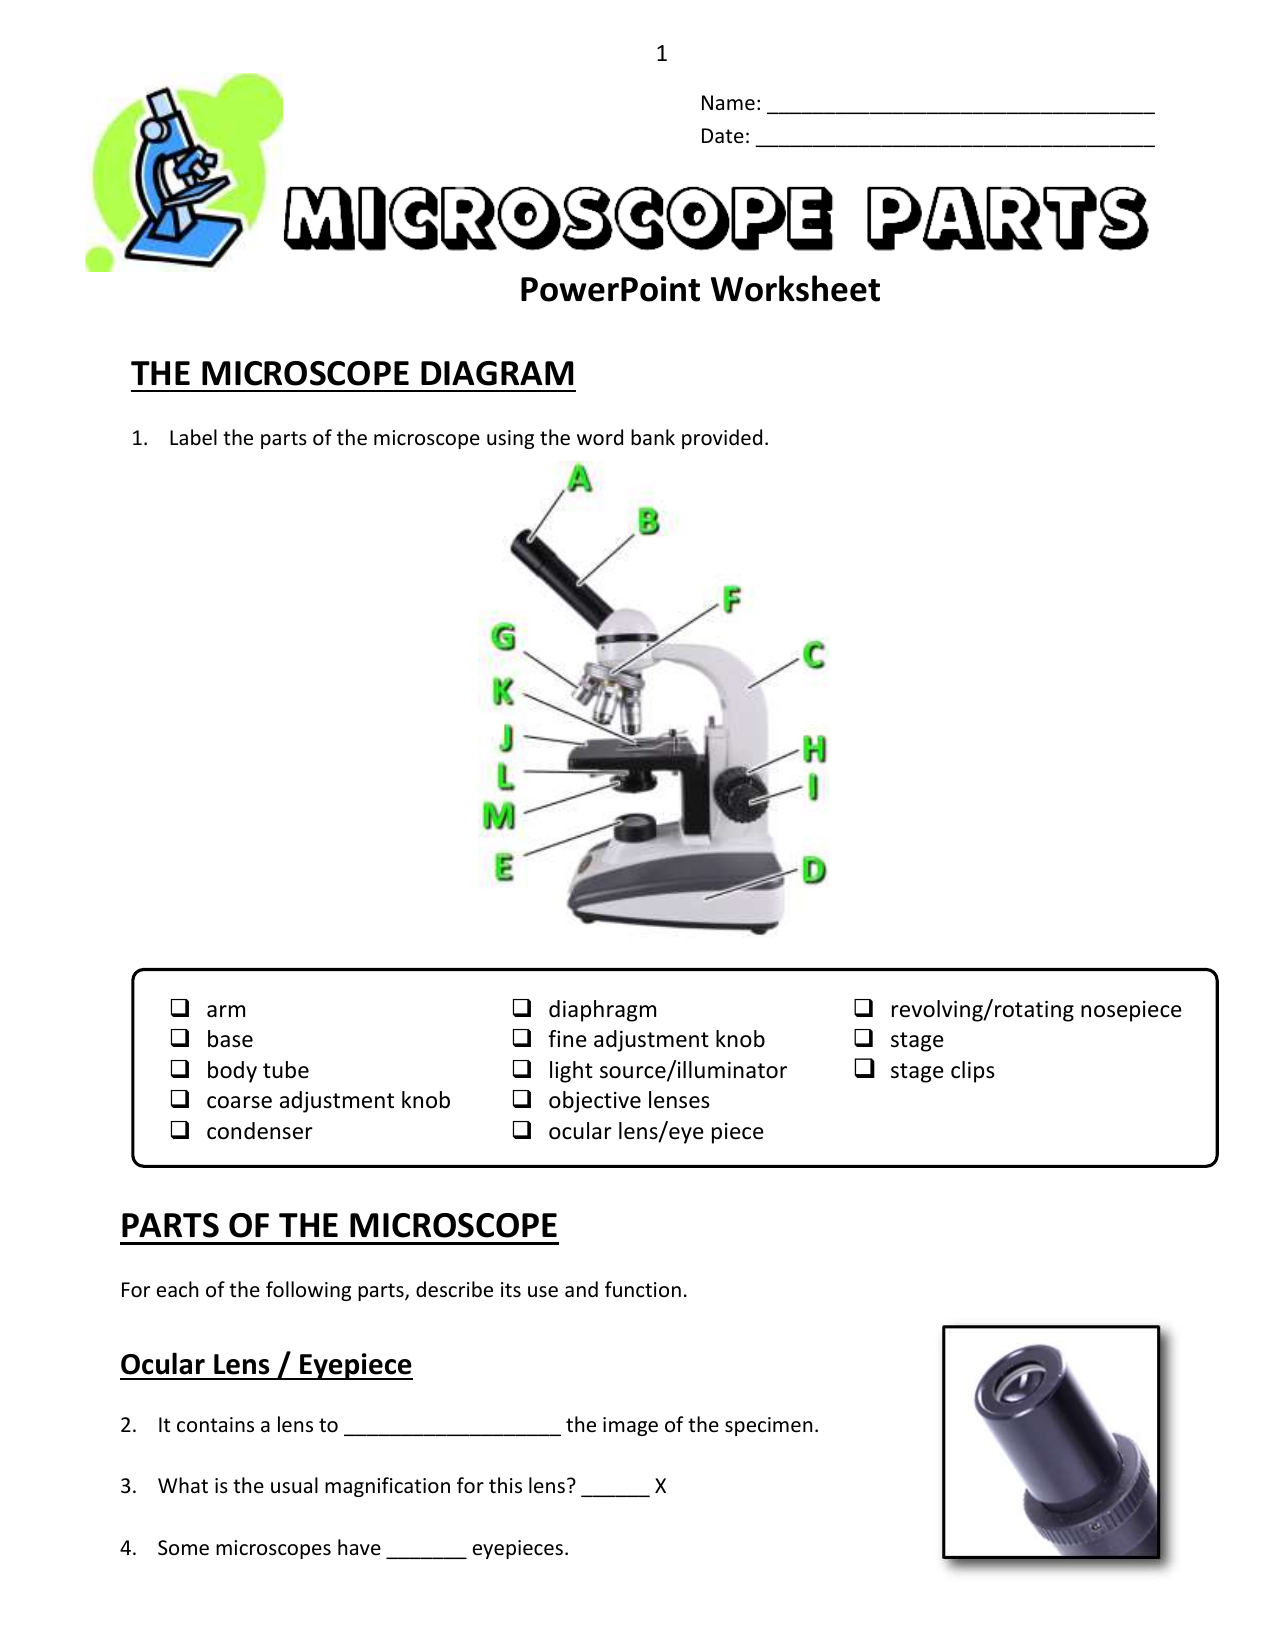 22 - Microscope Parts - PowerPoint Worksheet copy Regarding Microscope Parts And Use Worksheet